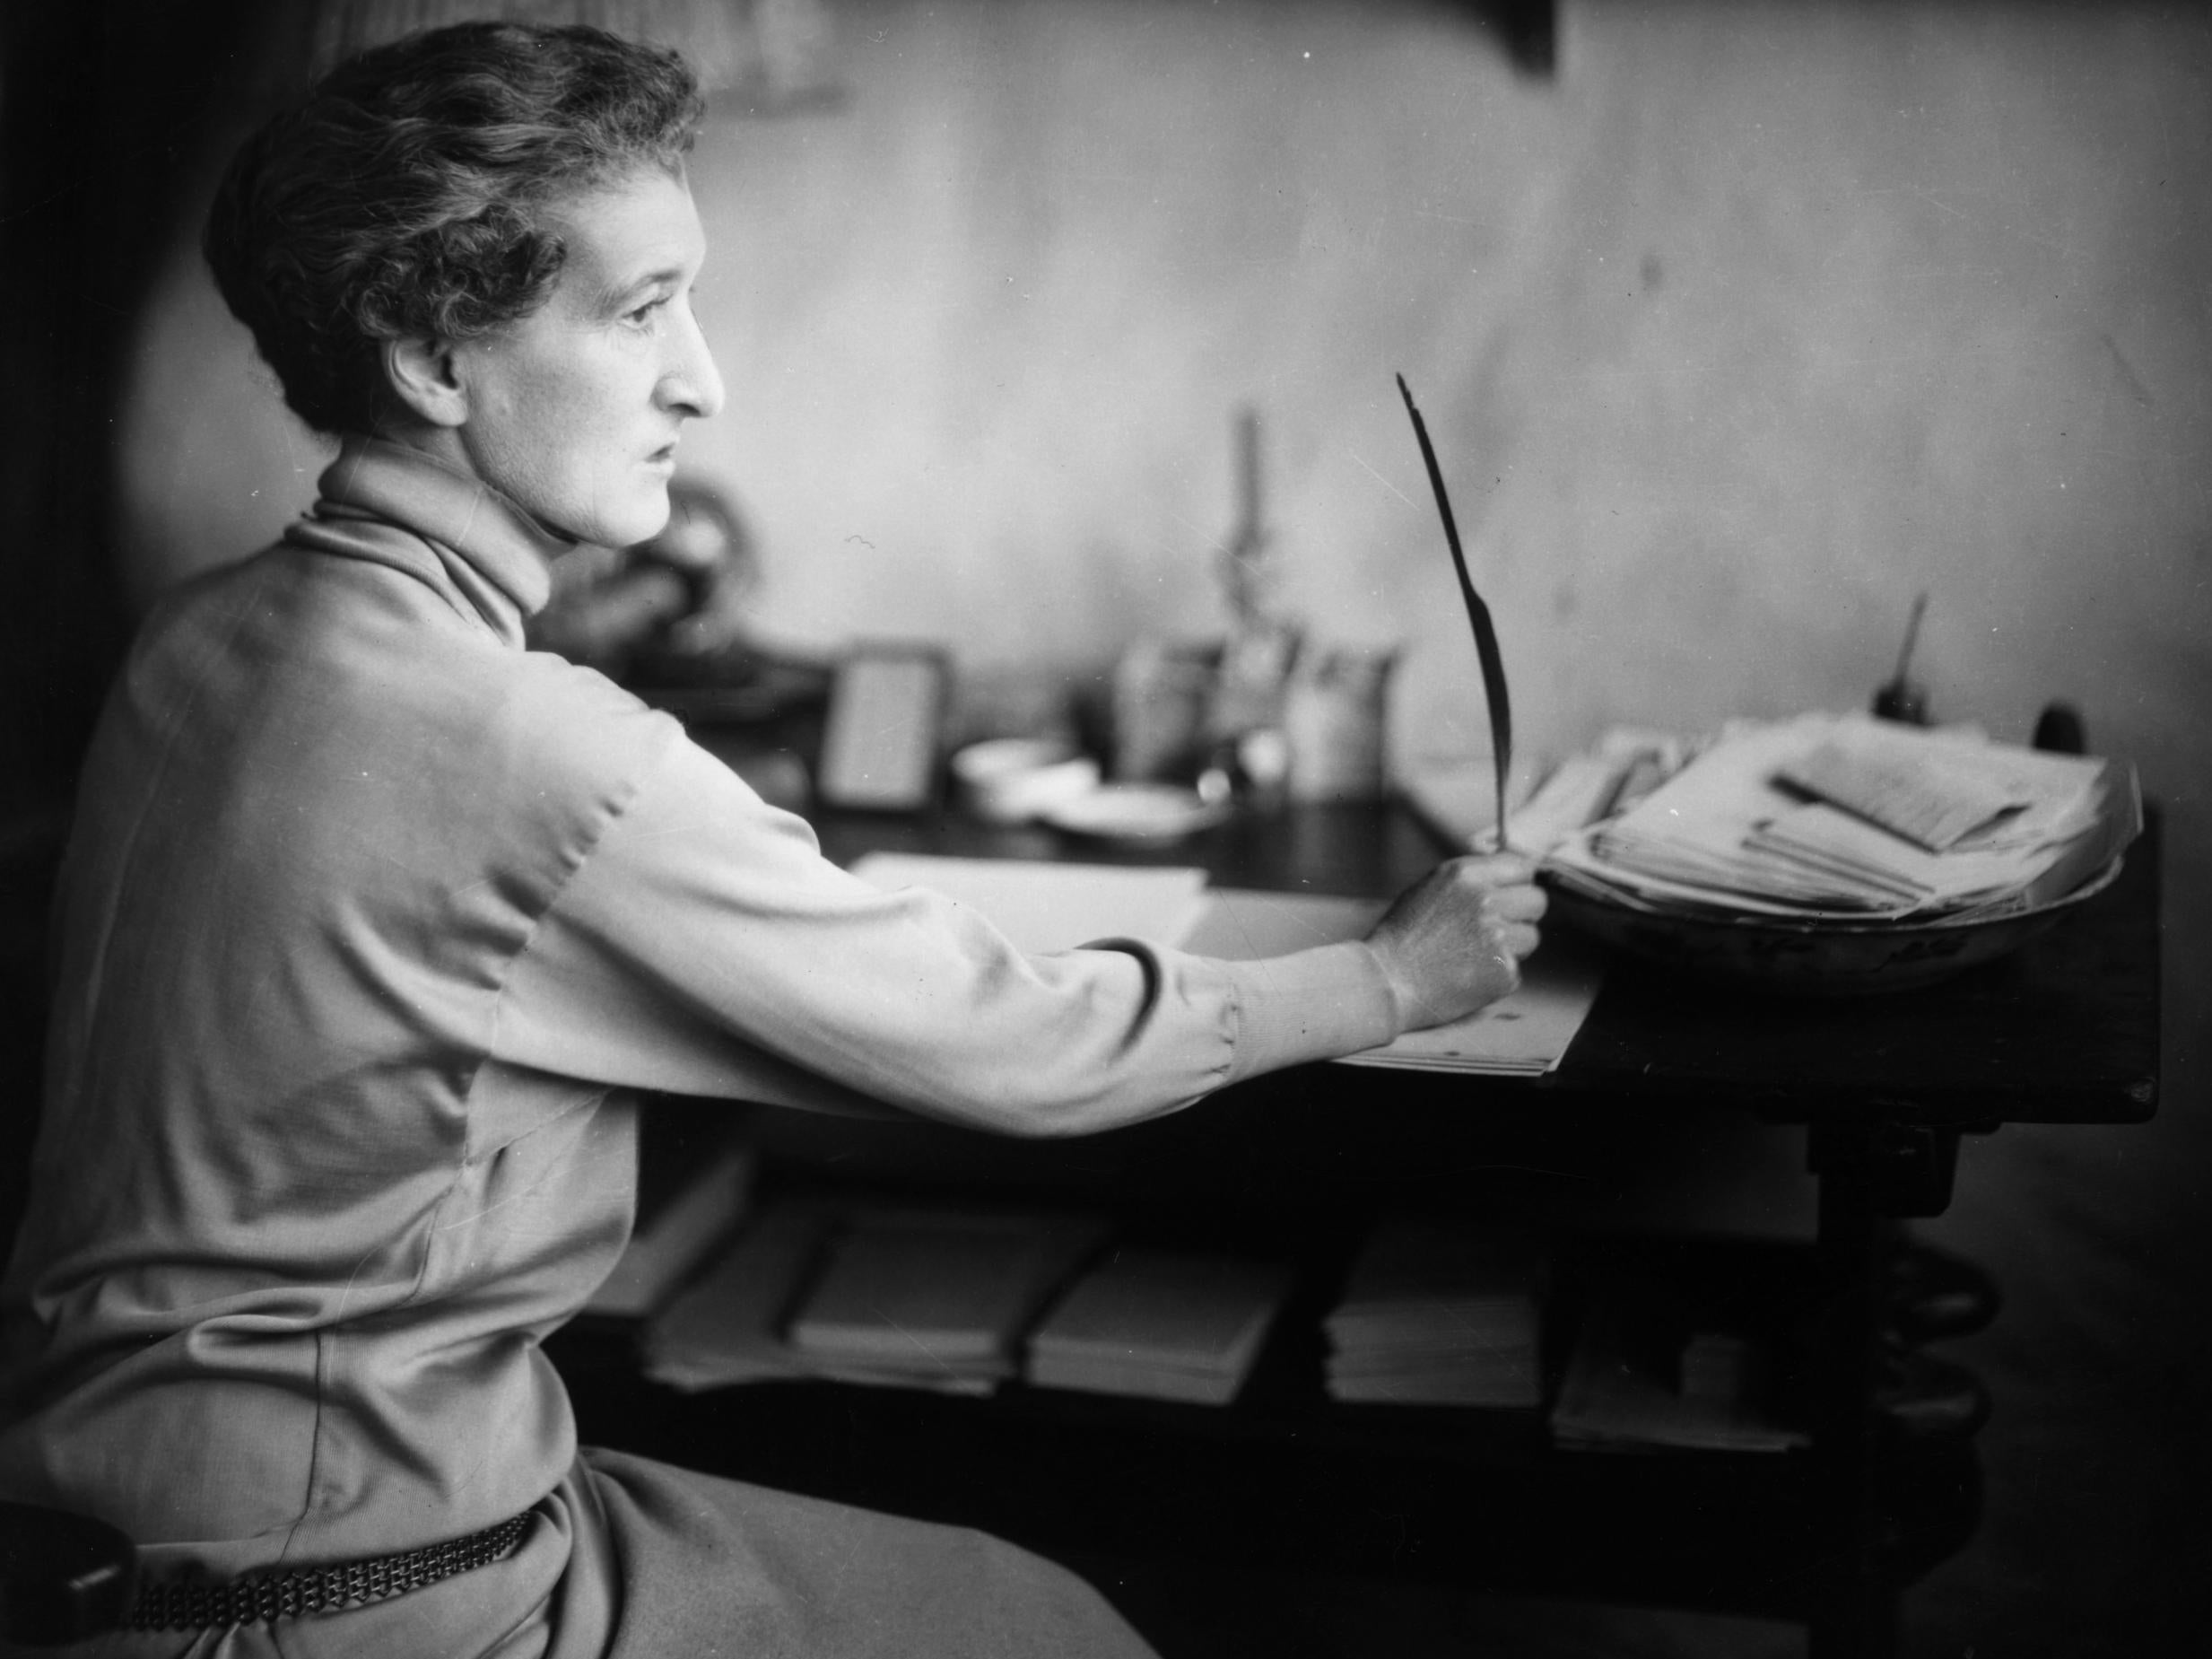 Famous diarist Margot Asquith caused a stir in the 1920s with her frank autobiography